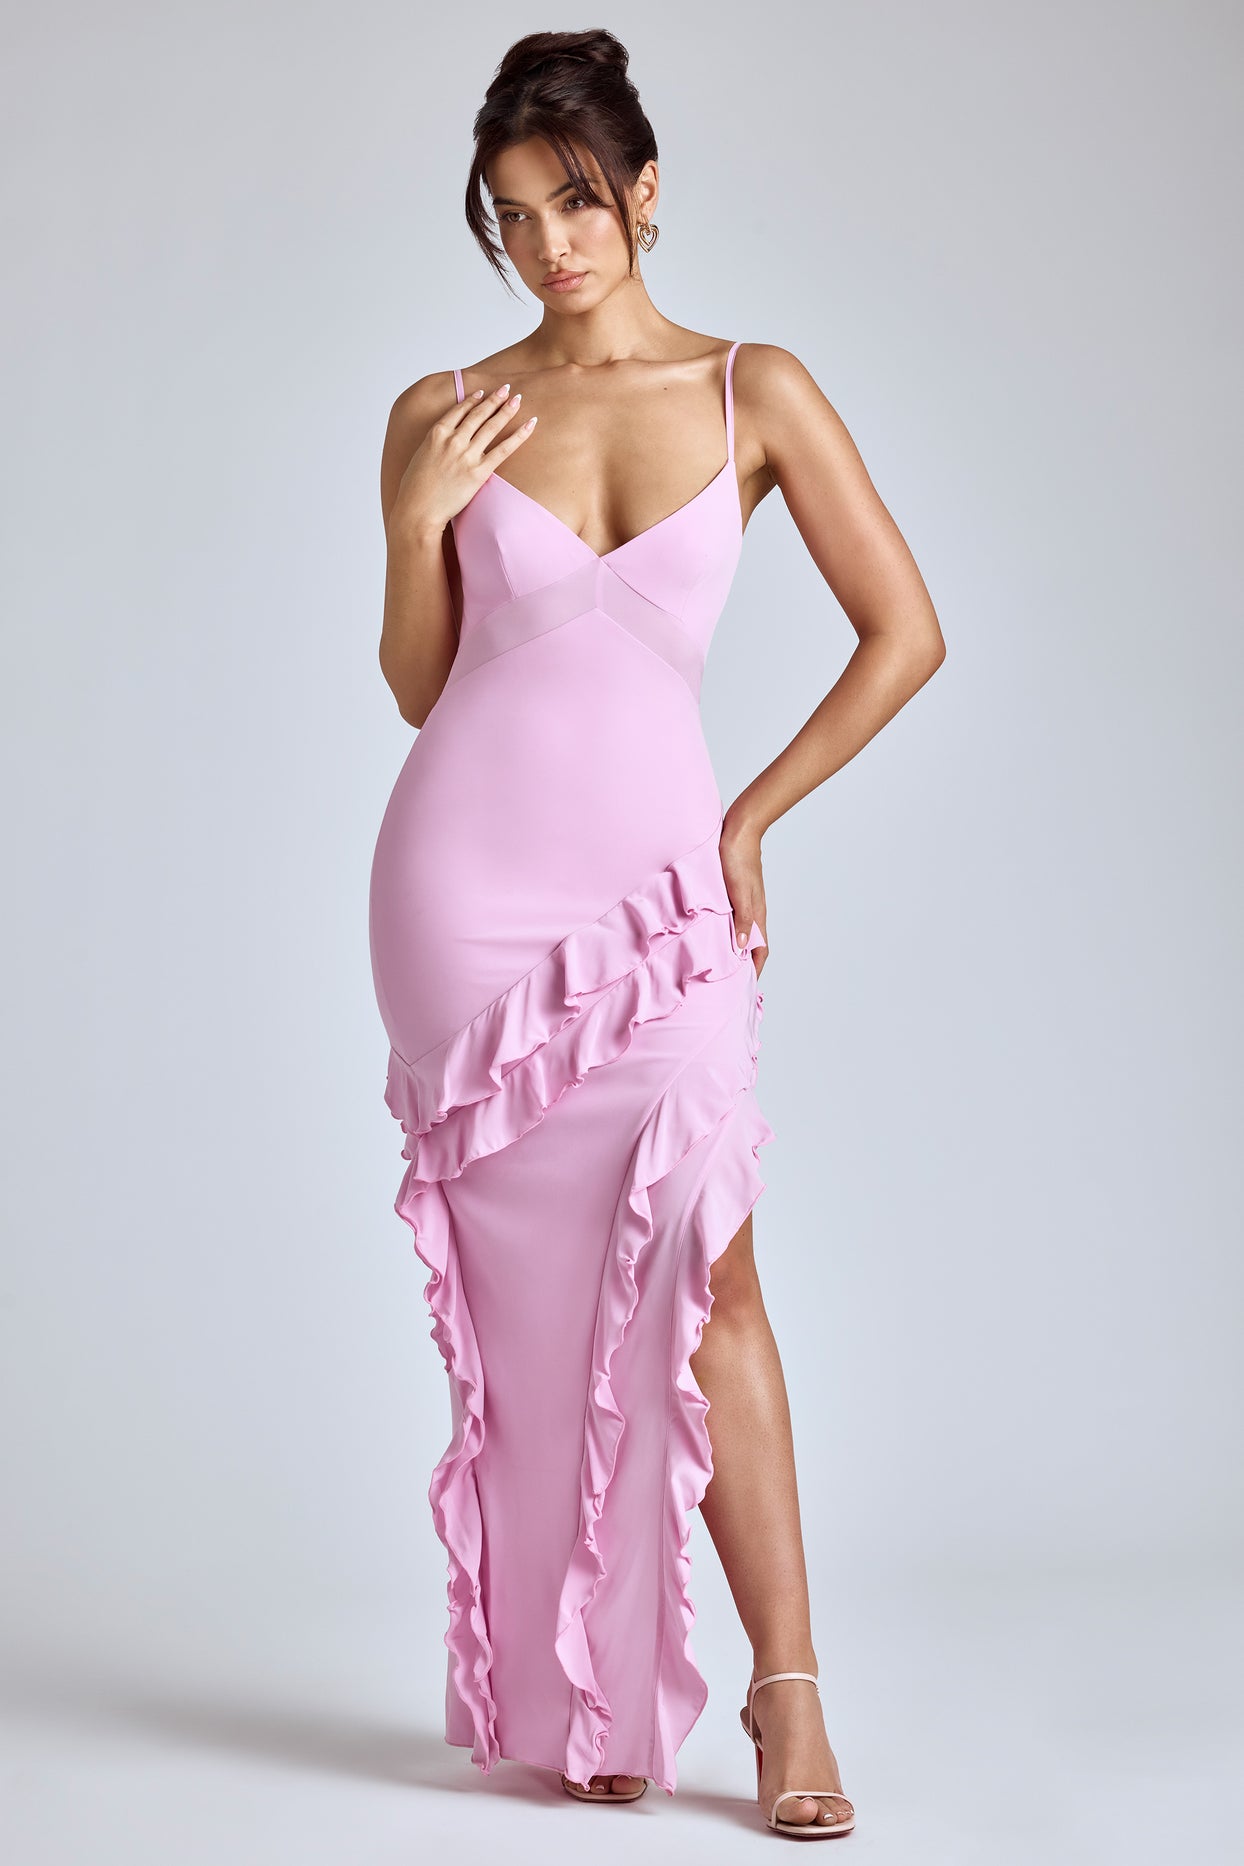 Panelled Ruffle Evening Gown in Baby Pink